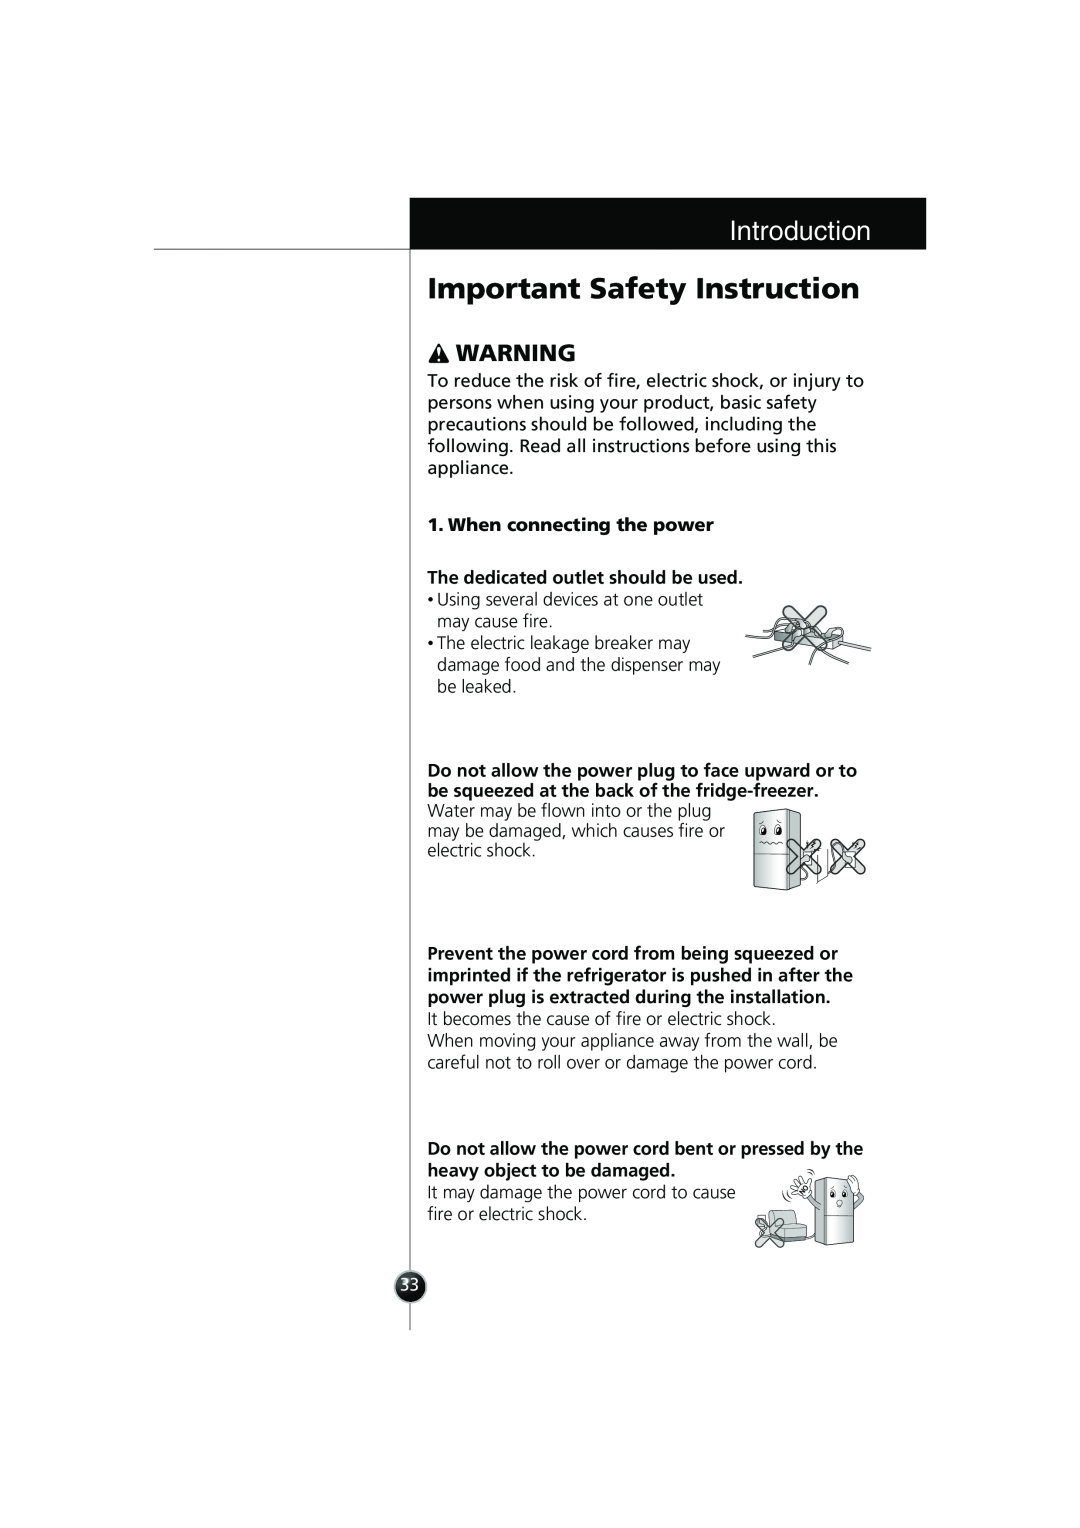 Smeg LB30AFNF, FB30AFNF manual Important Safety Instruction, Introduction, When connecting the power 